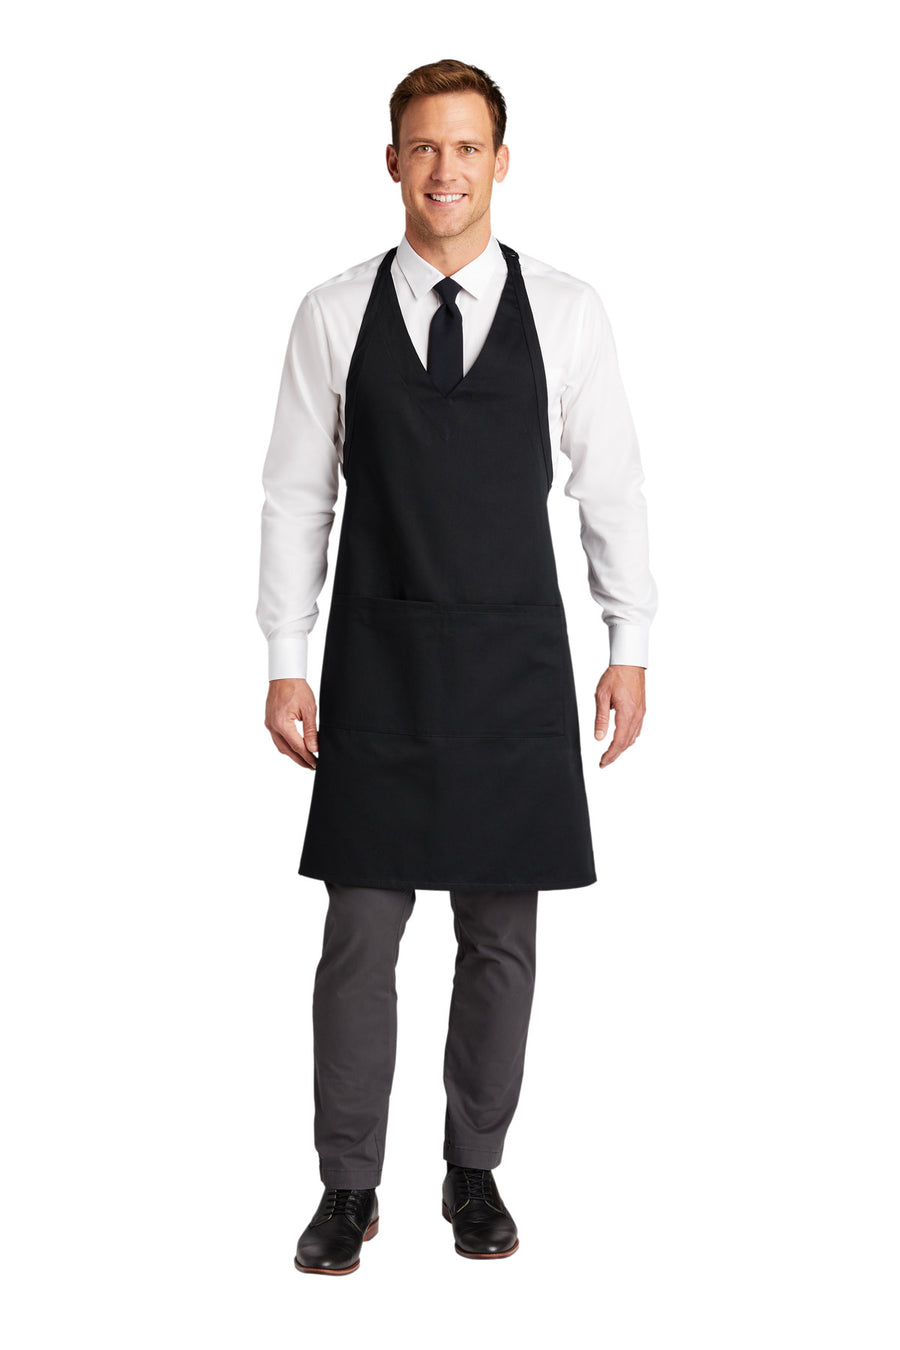 Port Authority Easy Care Tuxedo Apron with Stain Release.